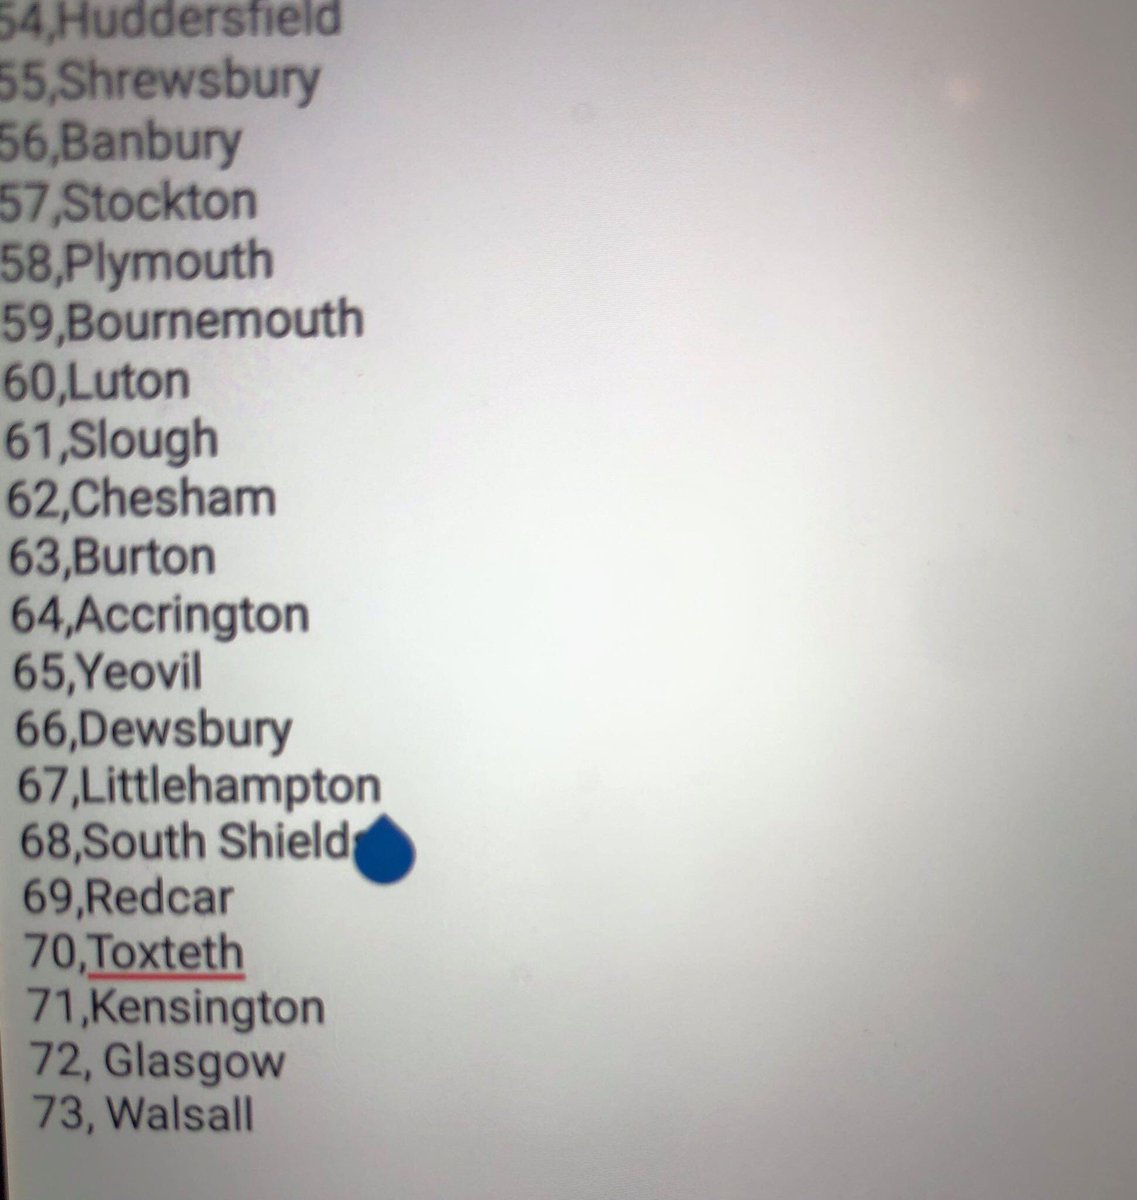 attached is a list of other towns and cities #Moslemgrooming gangs have operated 
Labour Party destroyed the minutes of meetings where rape gangs were discussed. On 11/9/14 #Rotherhamcouncil held a meeting to discuss Jay Report and agreed to deny everything.